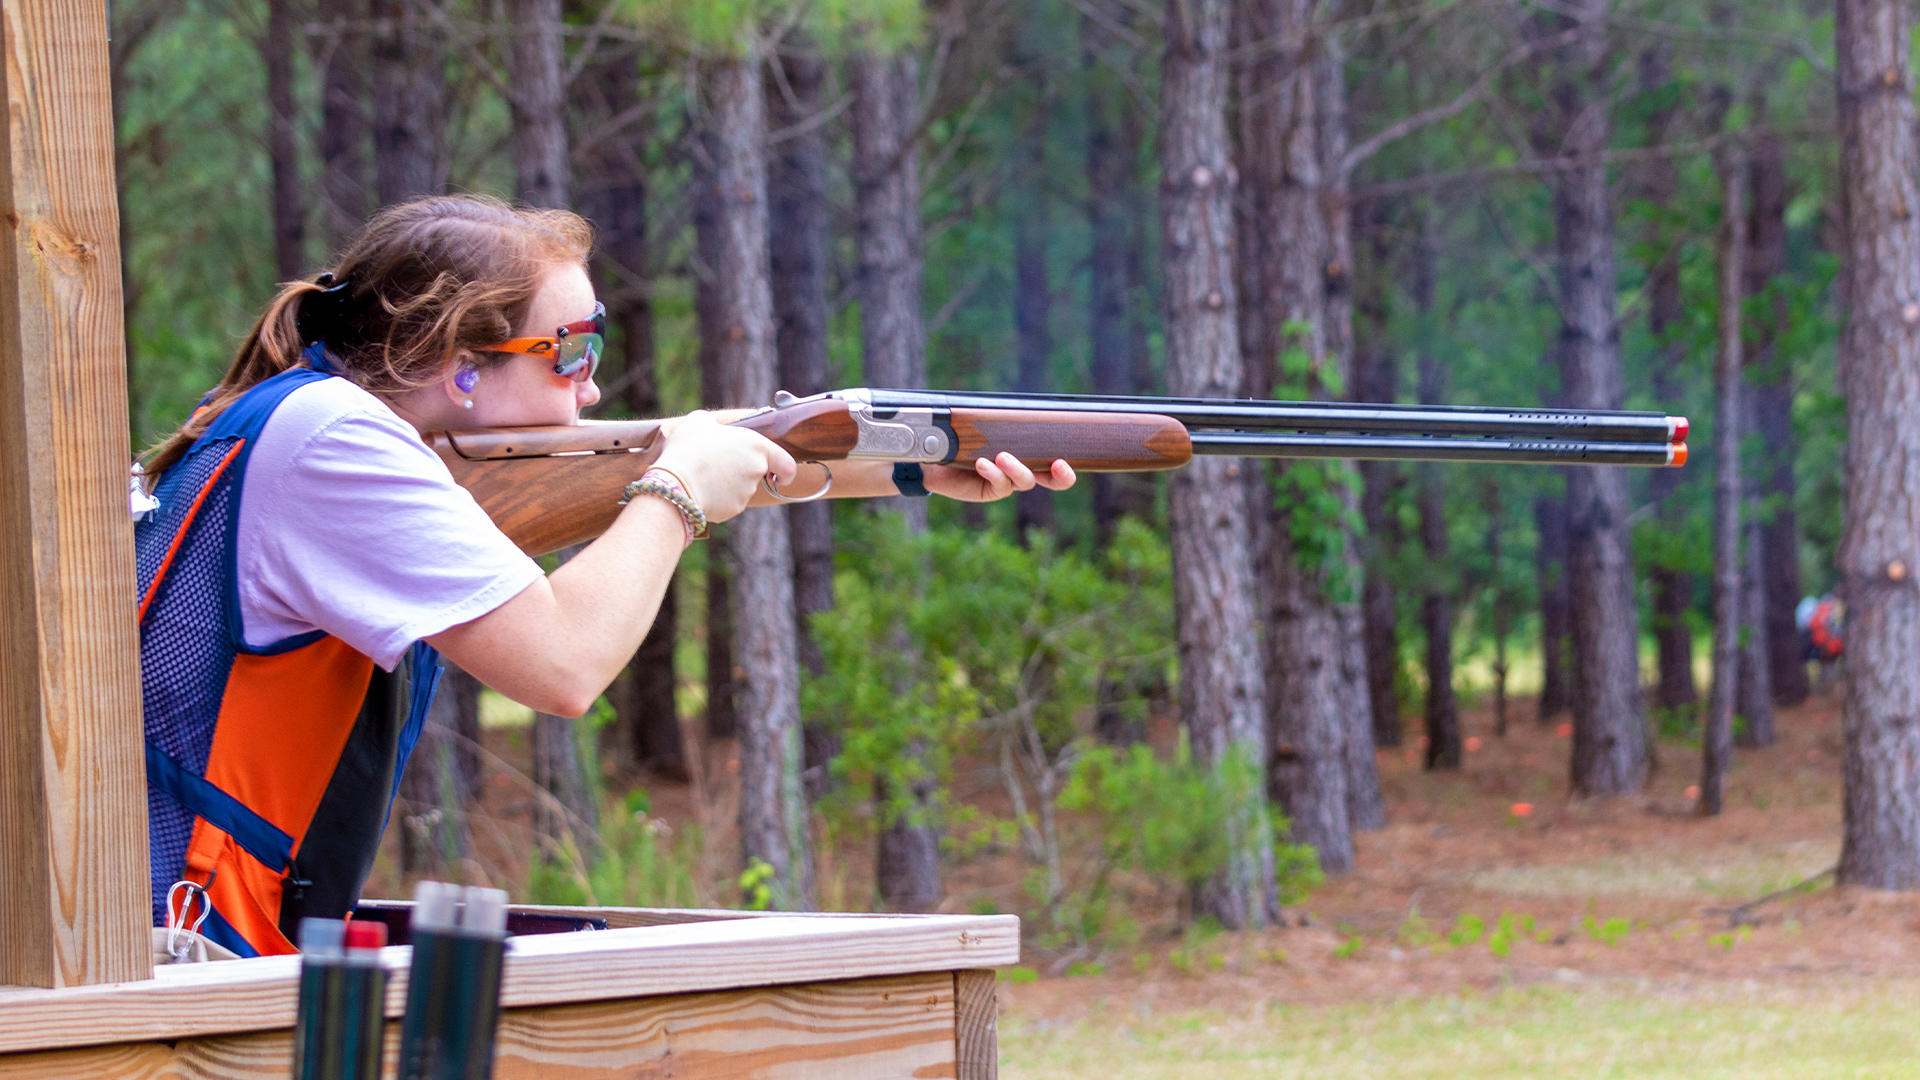 Lady sporting clays shooter with Beretta shotgun